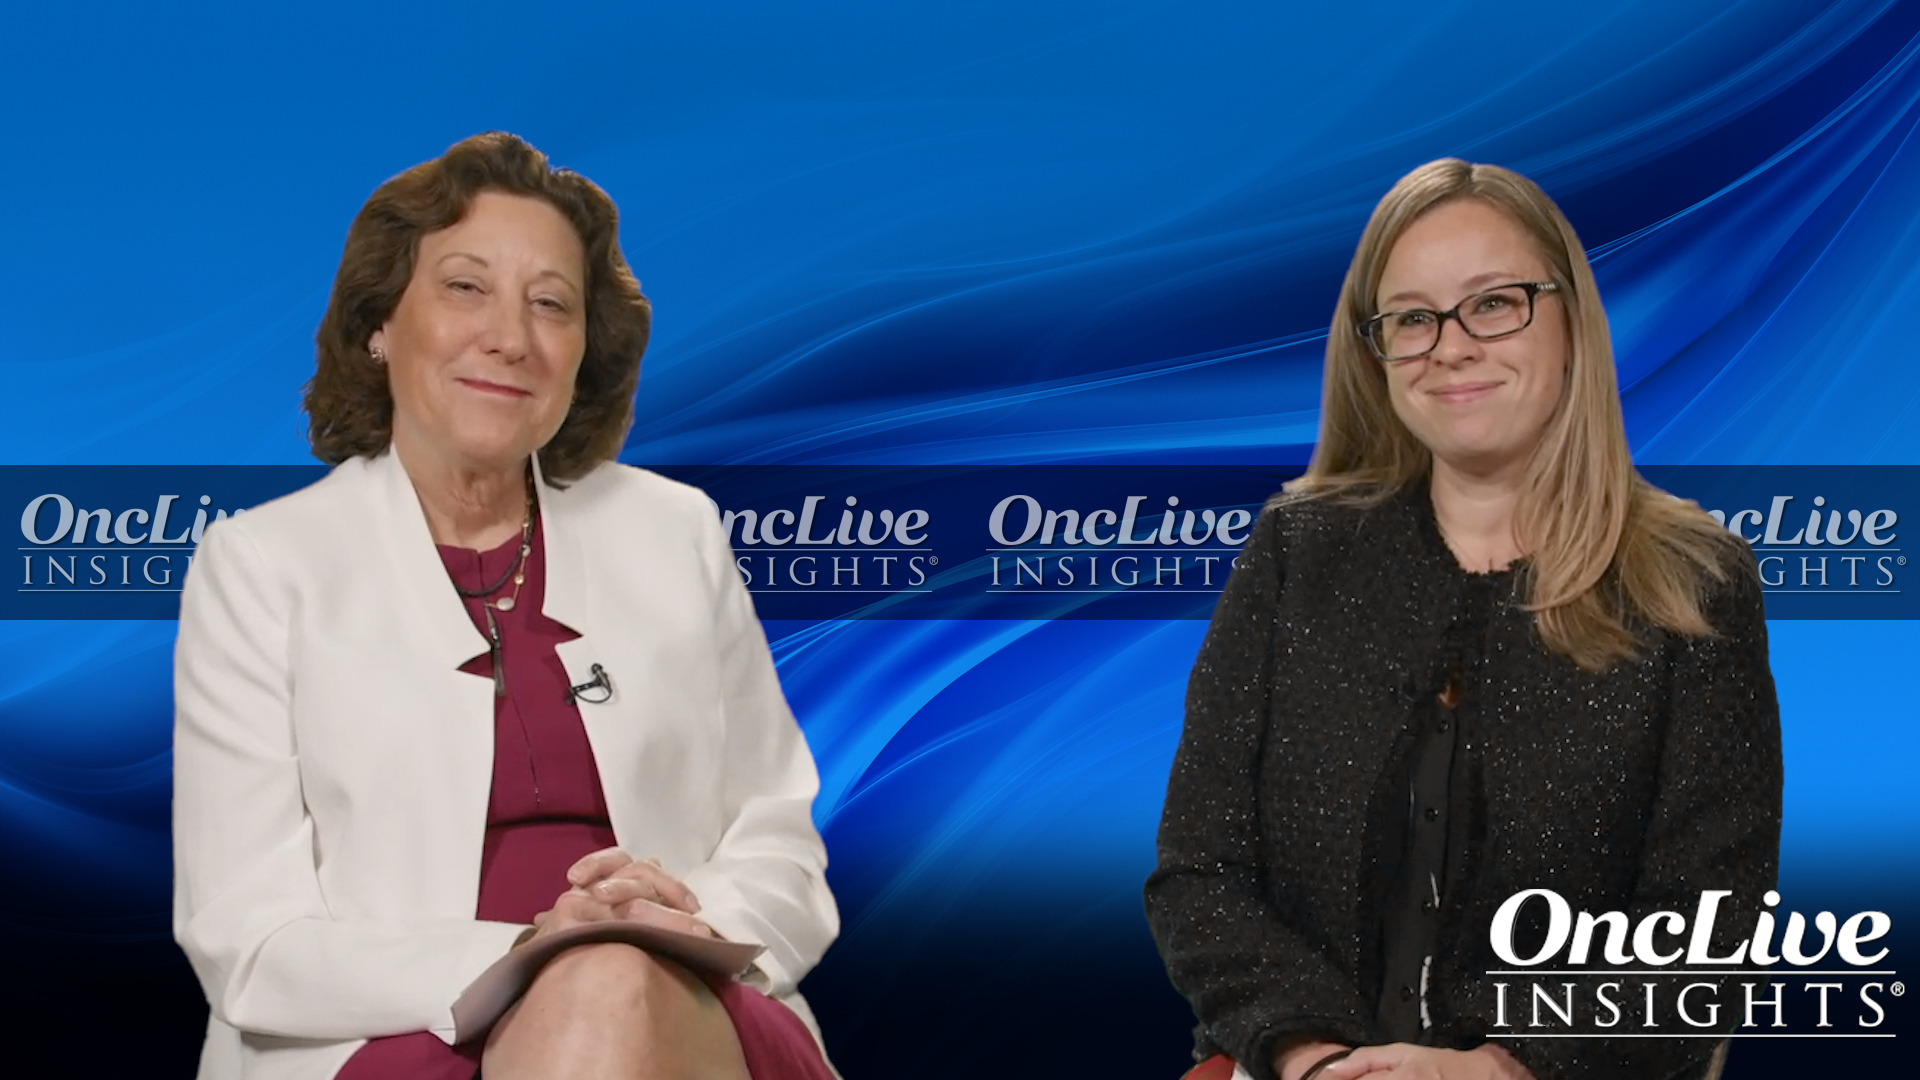 OncLive series - "Optimizing Patient Outcomes in High-Risk HR+, HER2- Early-Stage Breast Cancer"